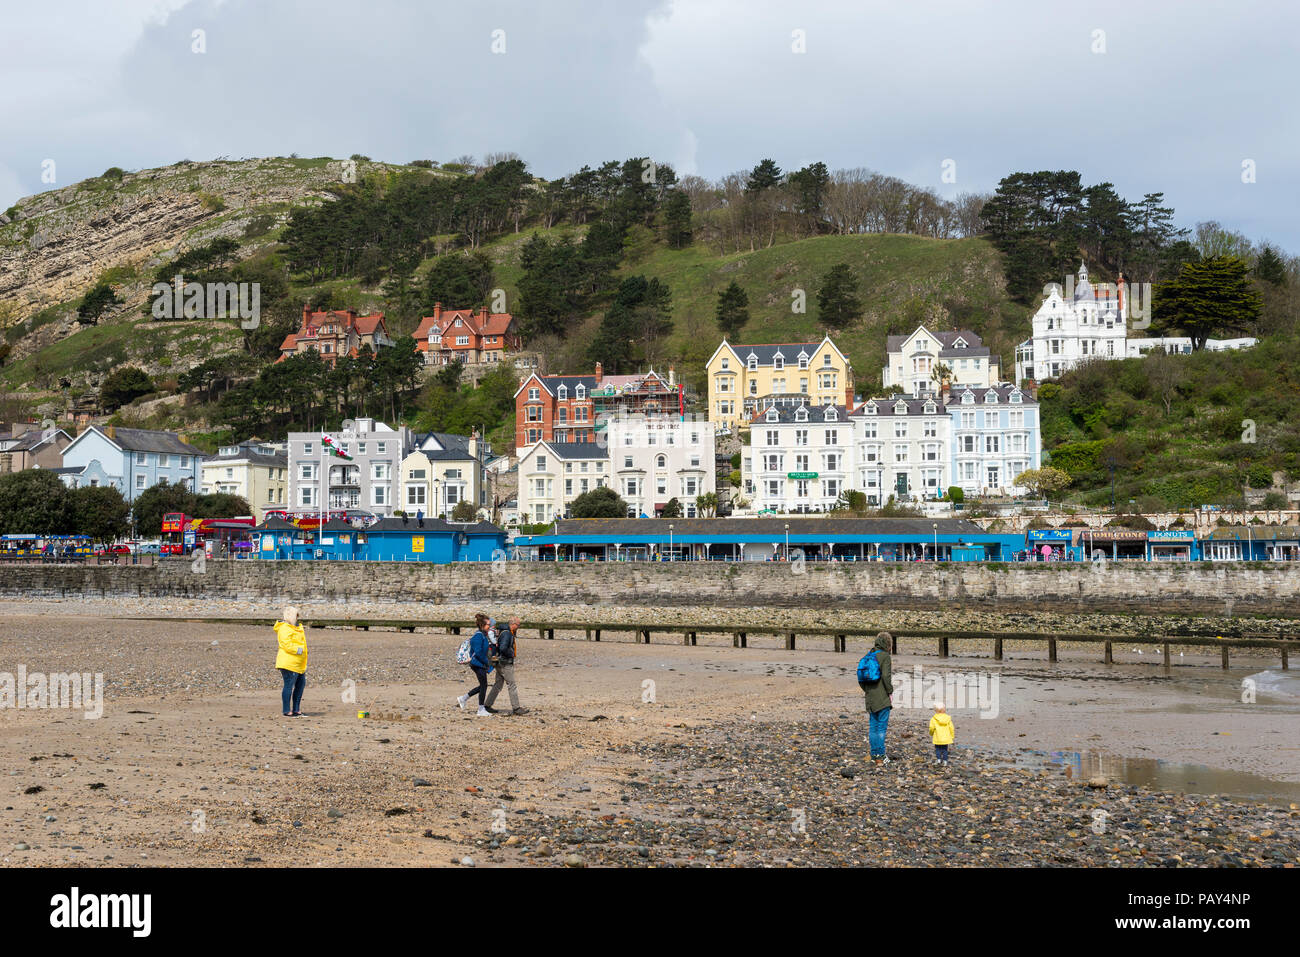 Family on the beach at Llandudno, a seaside town on the coast of North Wales, UK. Stock Photo